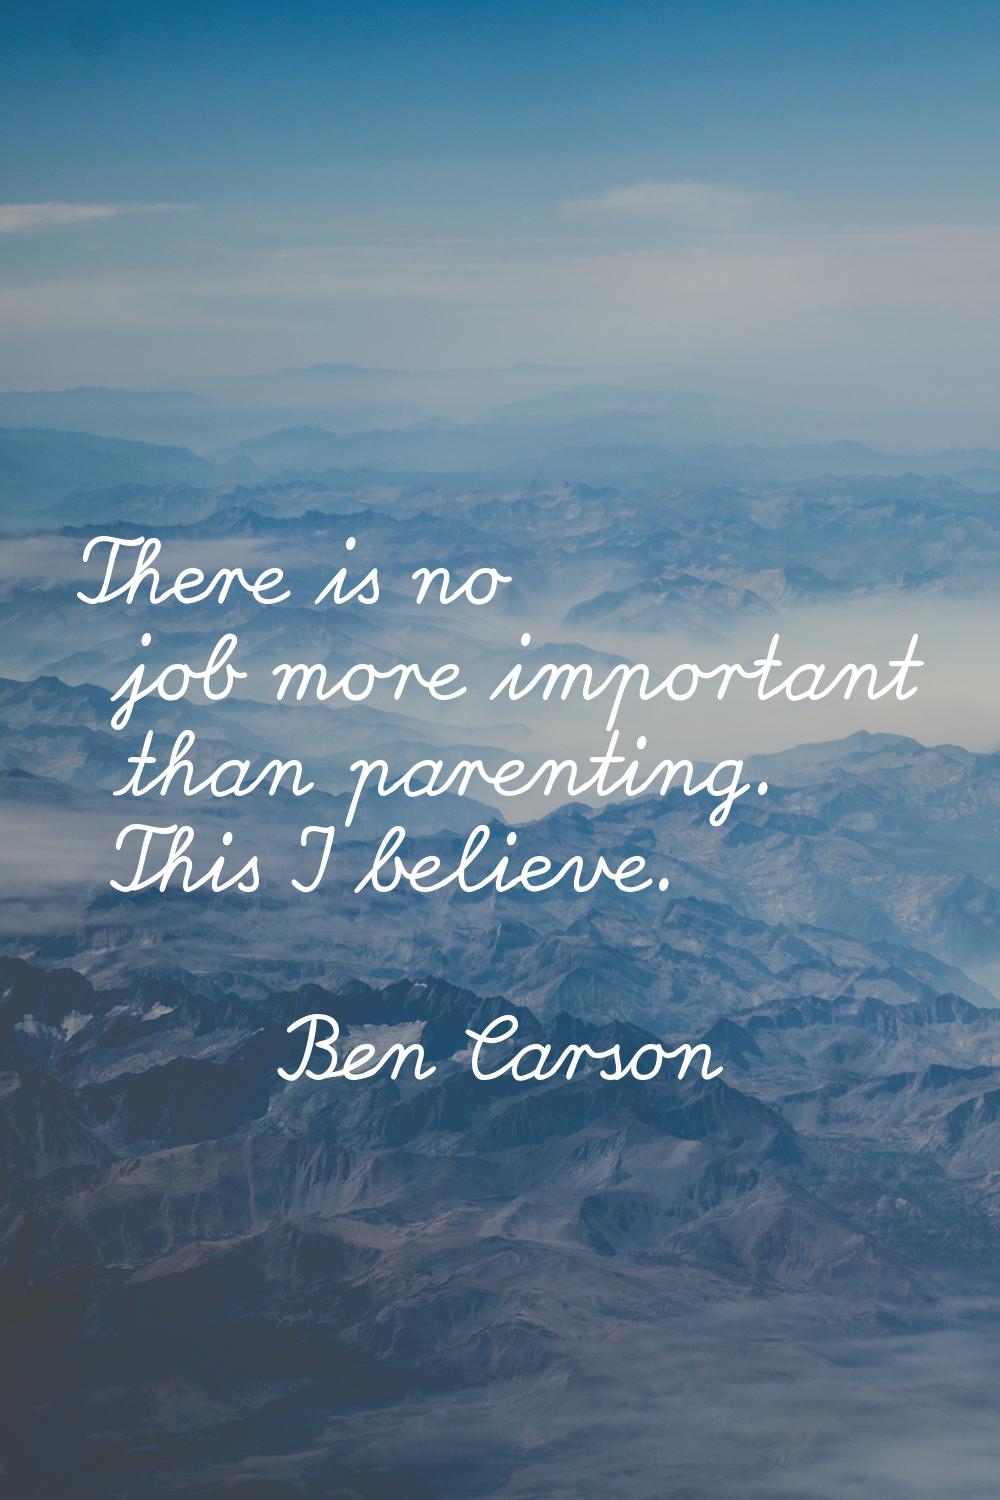 There is no job more important than parenting. This I believe.